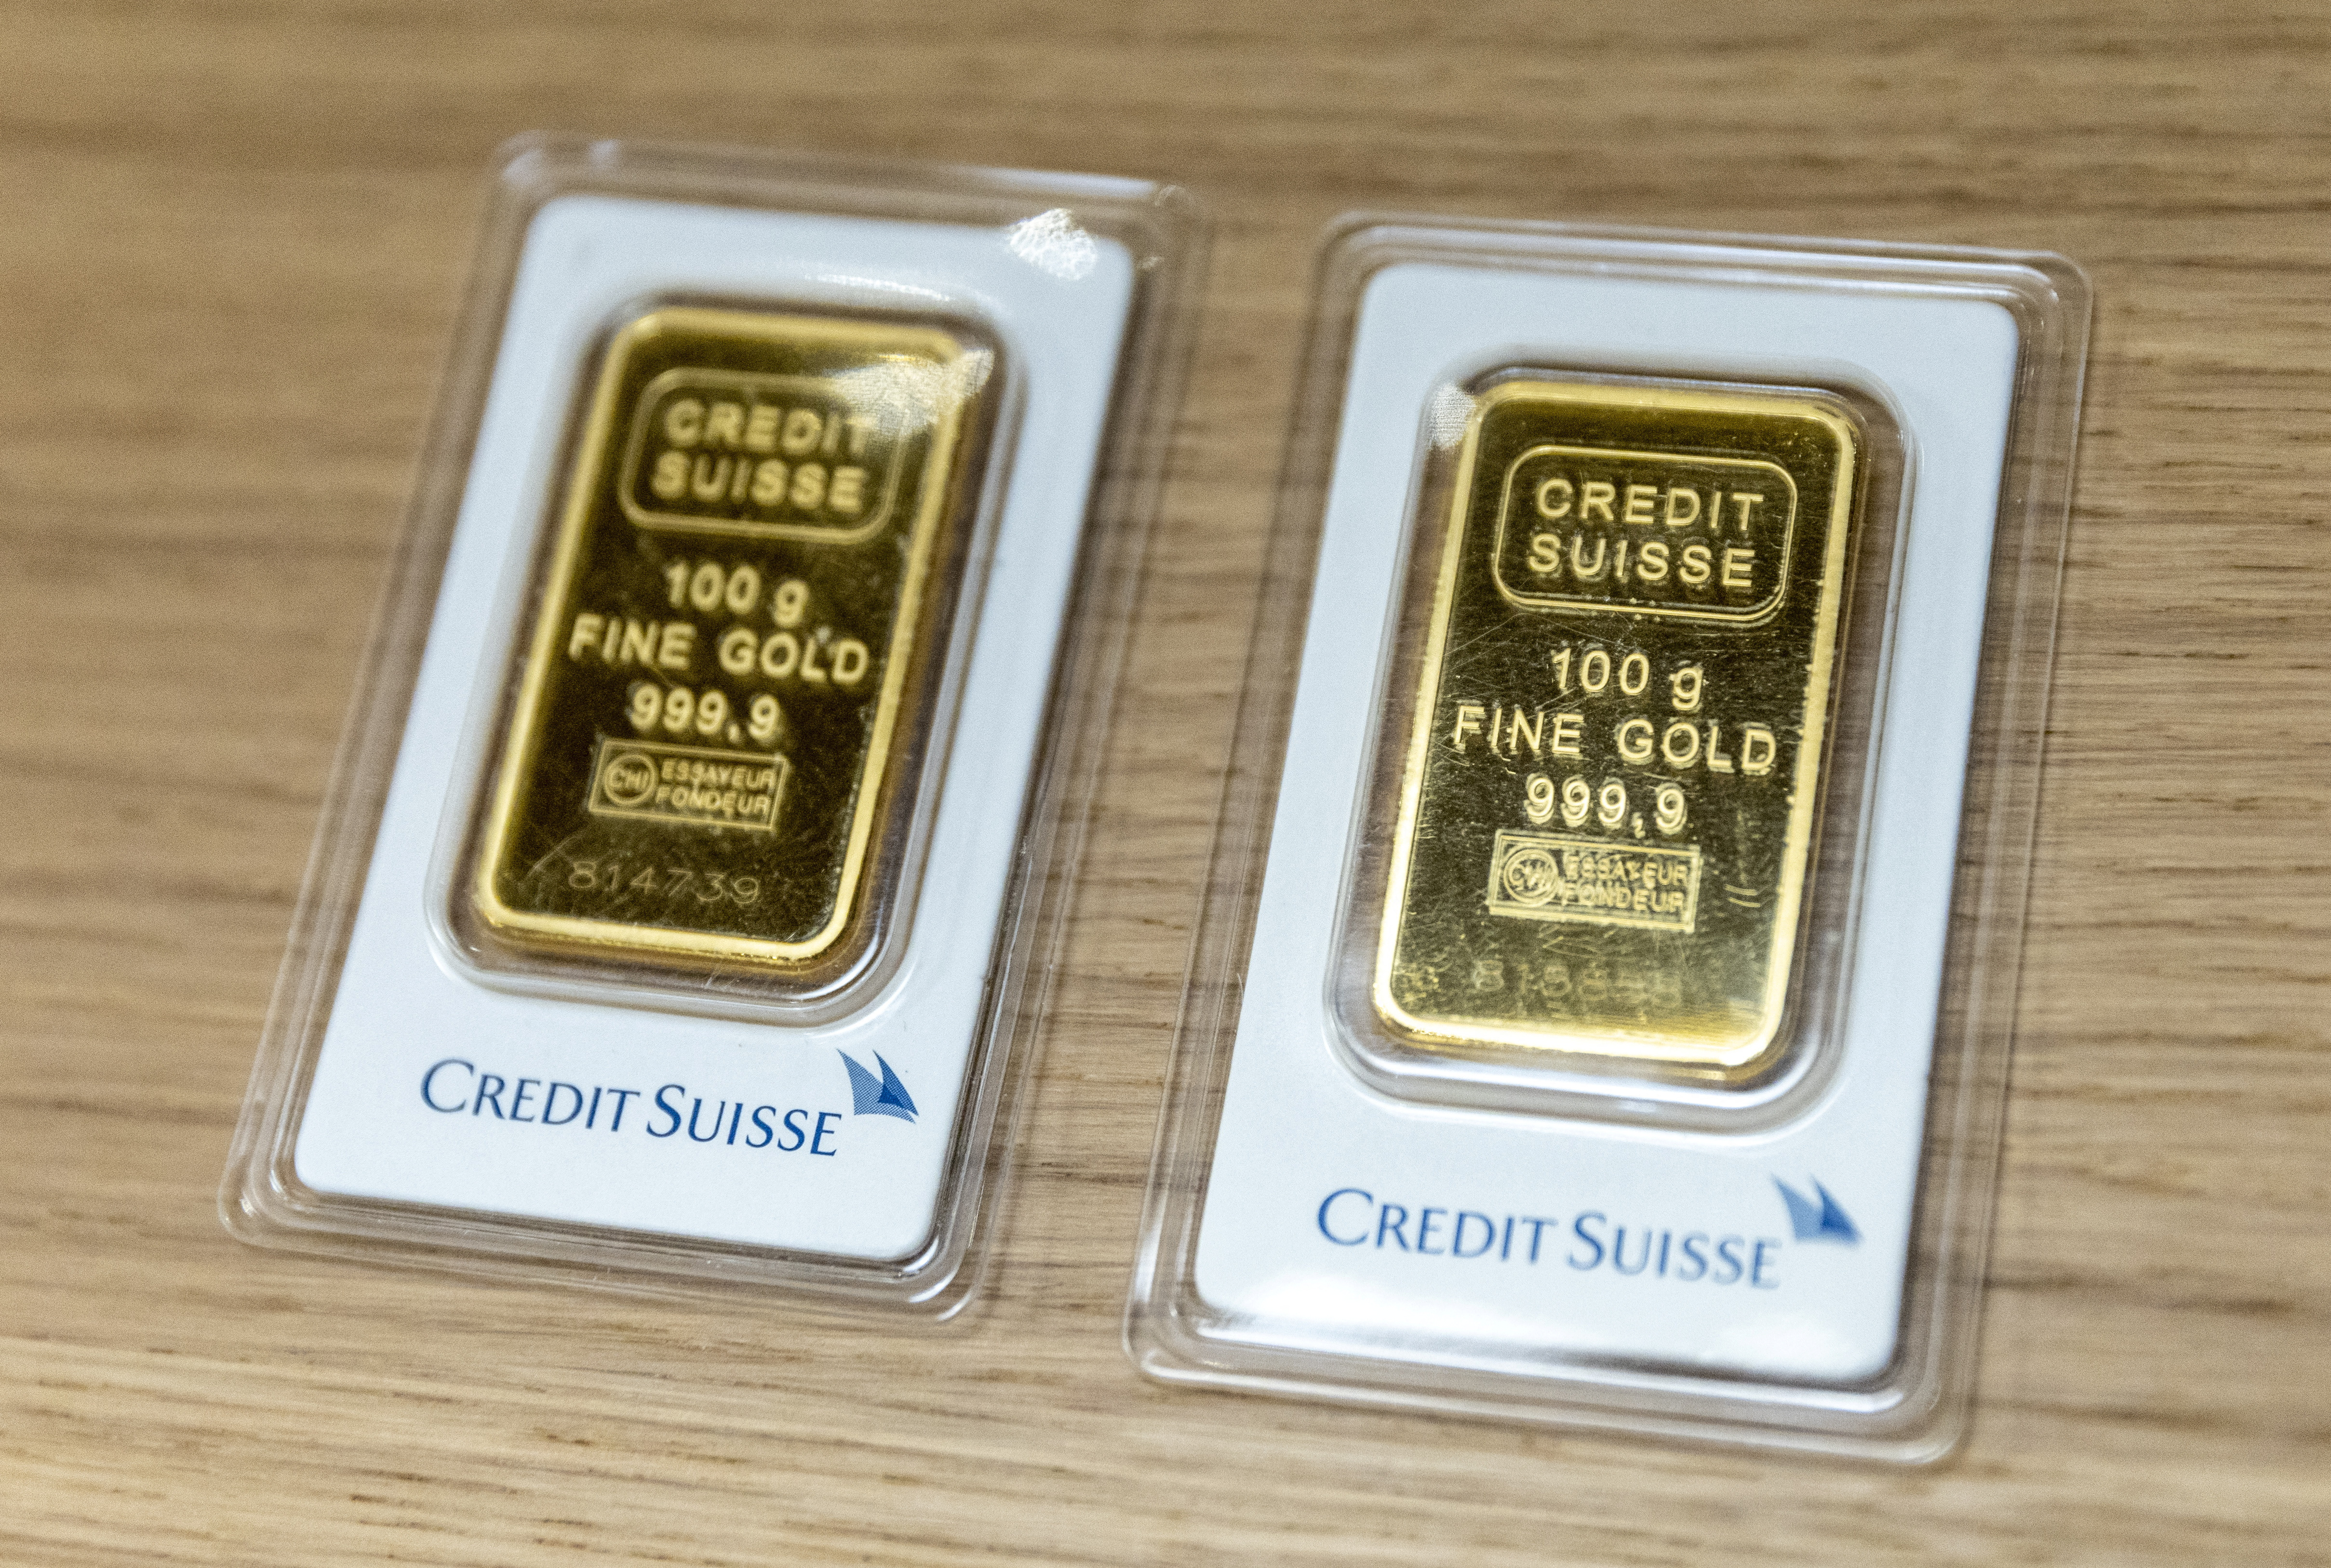 Gold bars from the Credit Suisse are seen in a shop in Zurich